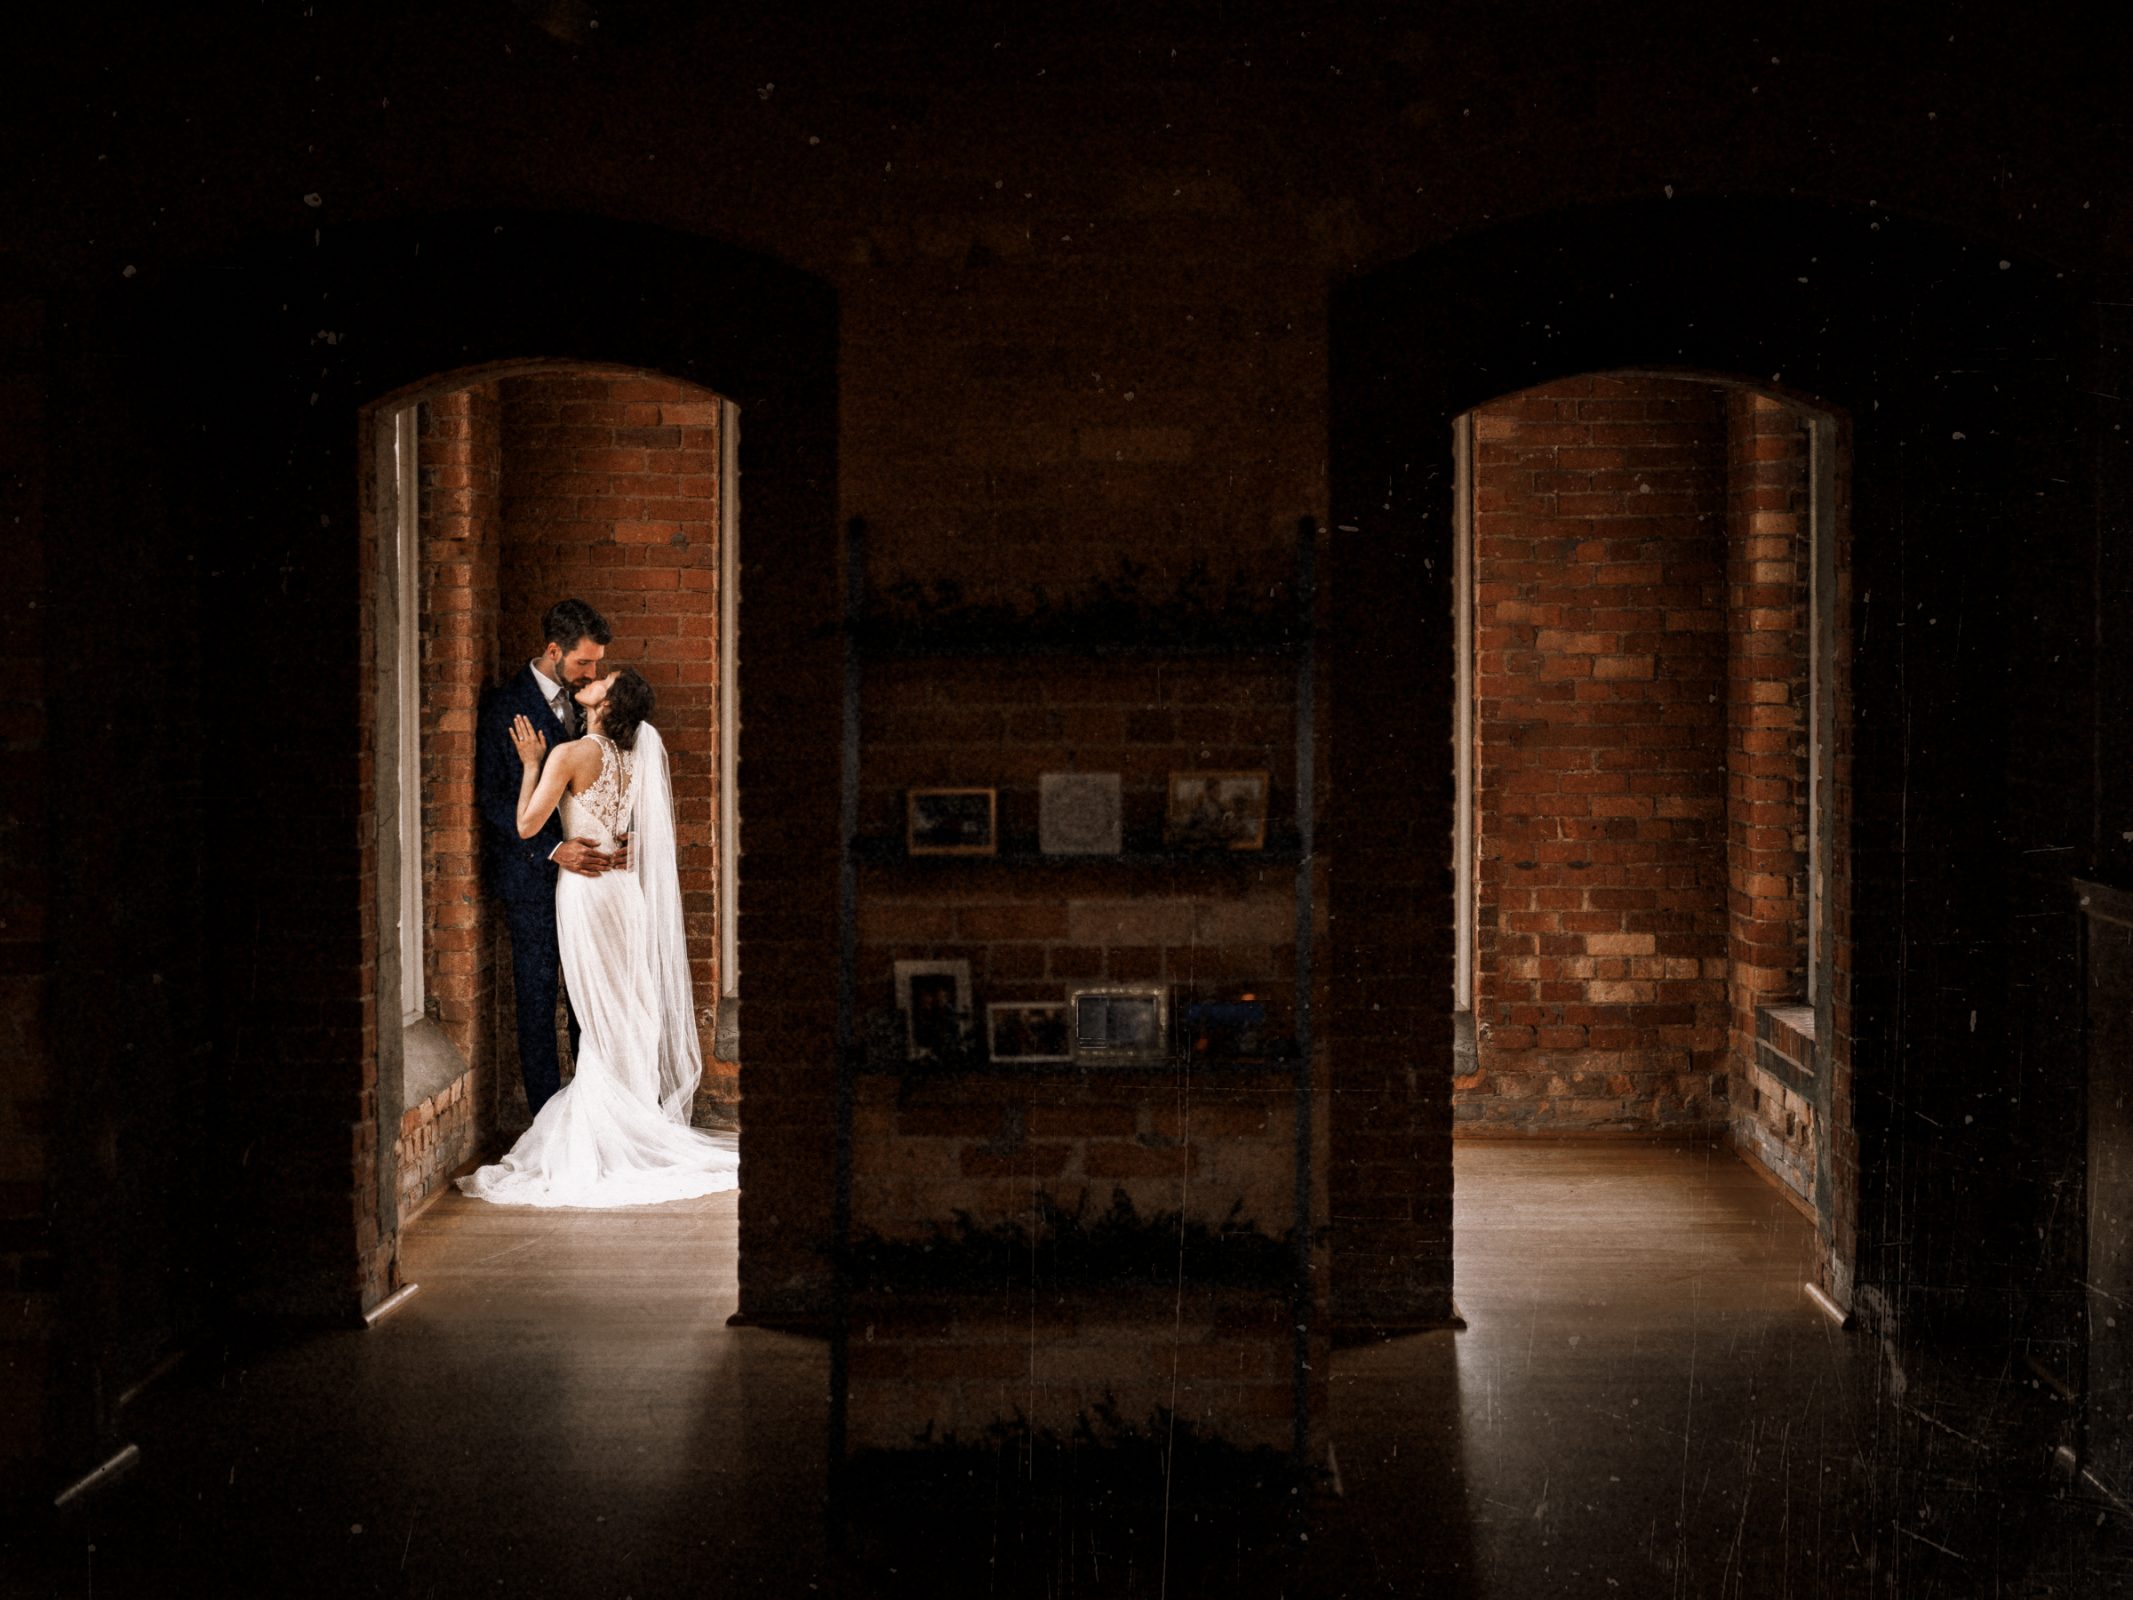 Wedding Photography in Raleigh, Durham & Chapel Hill, NC